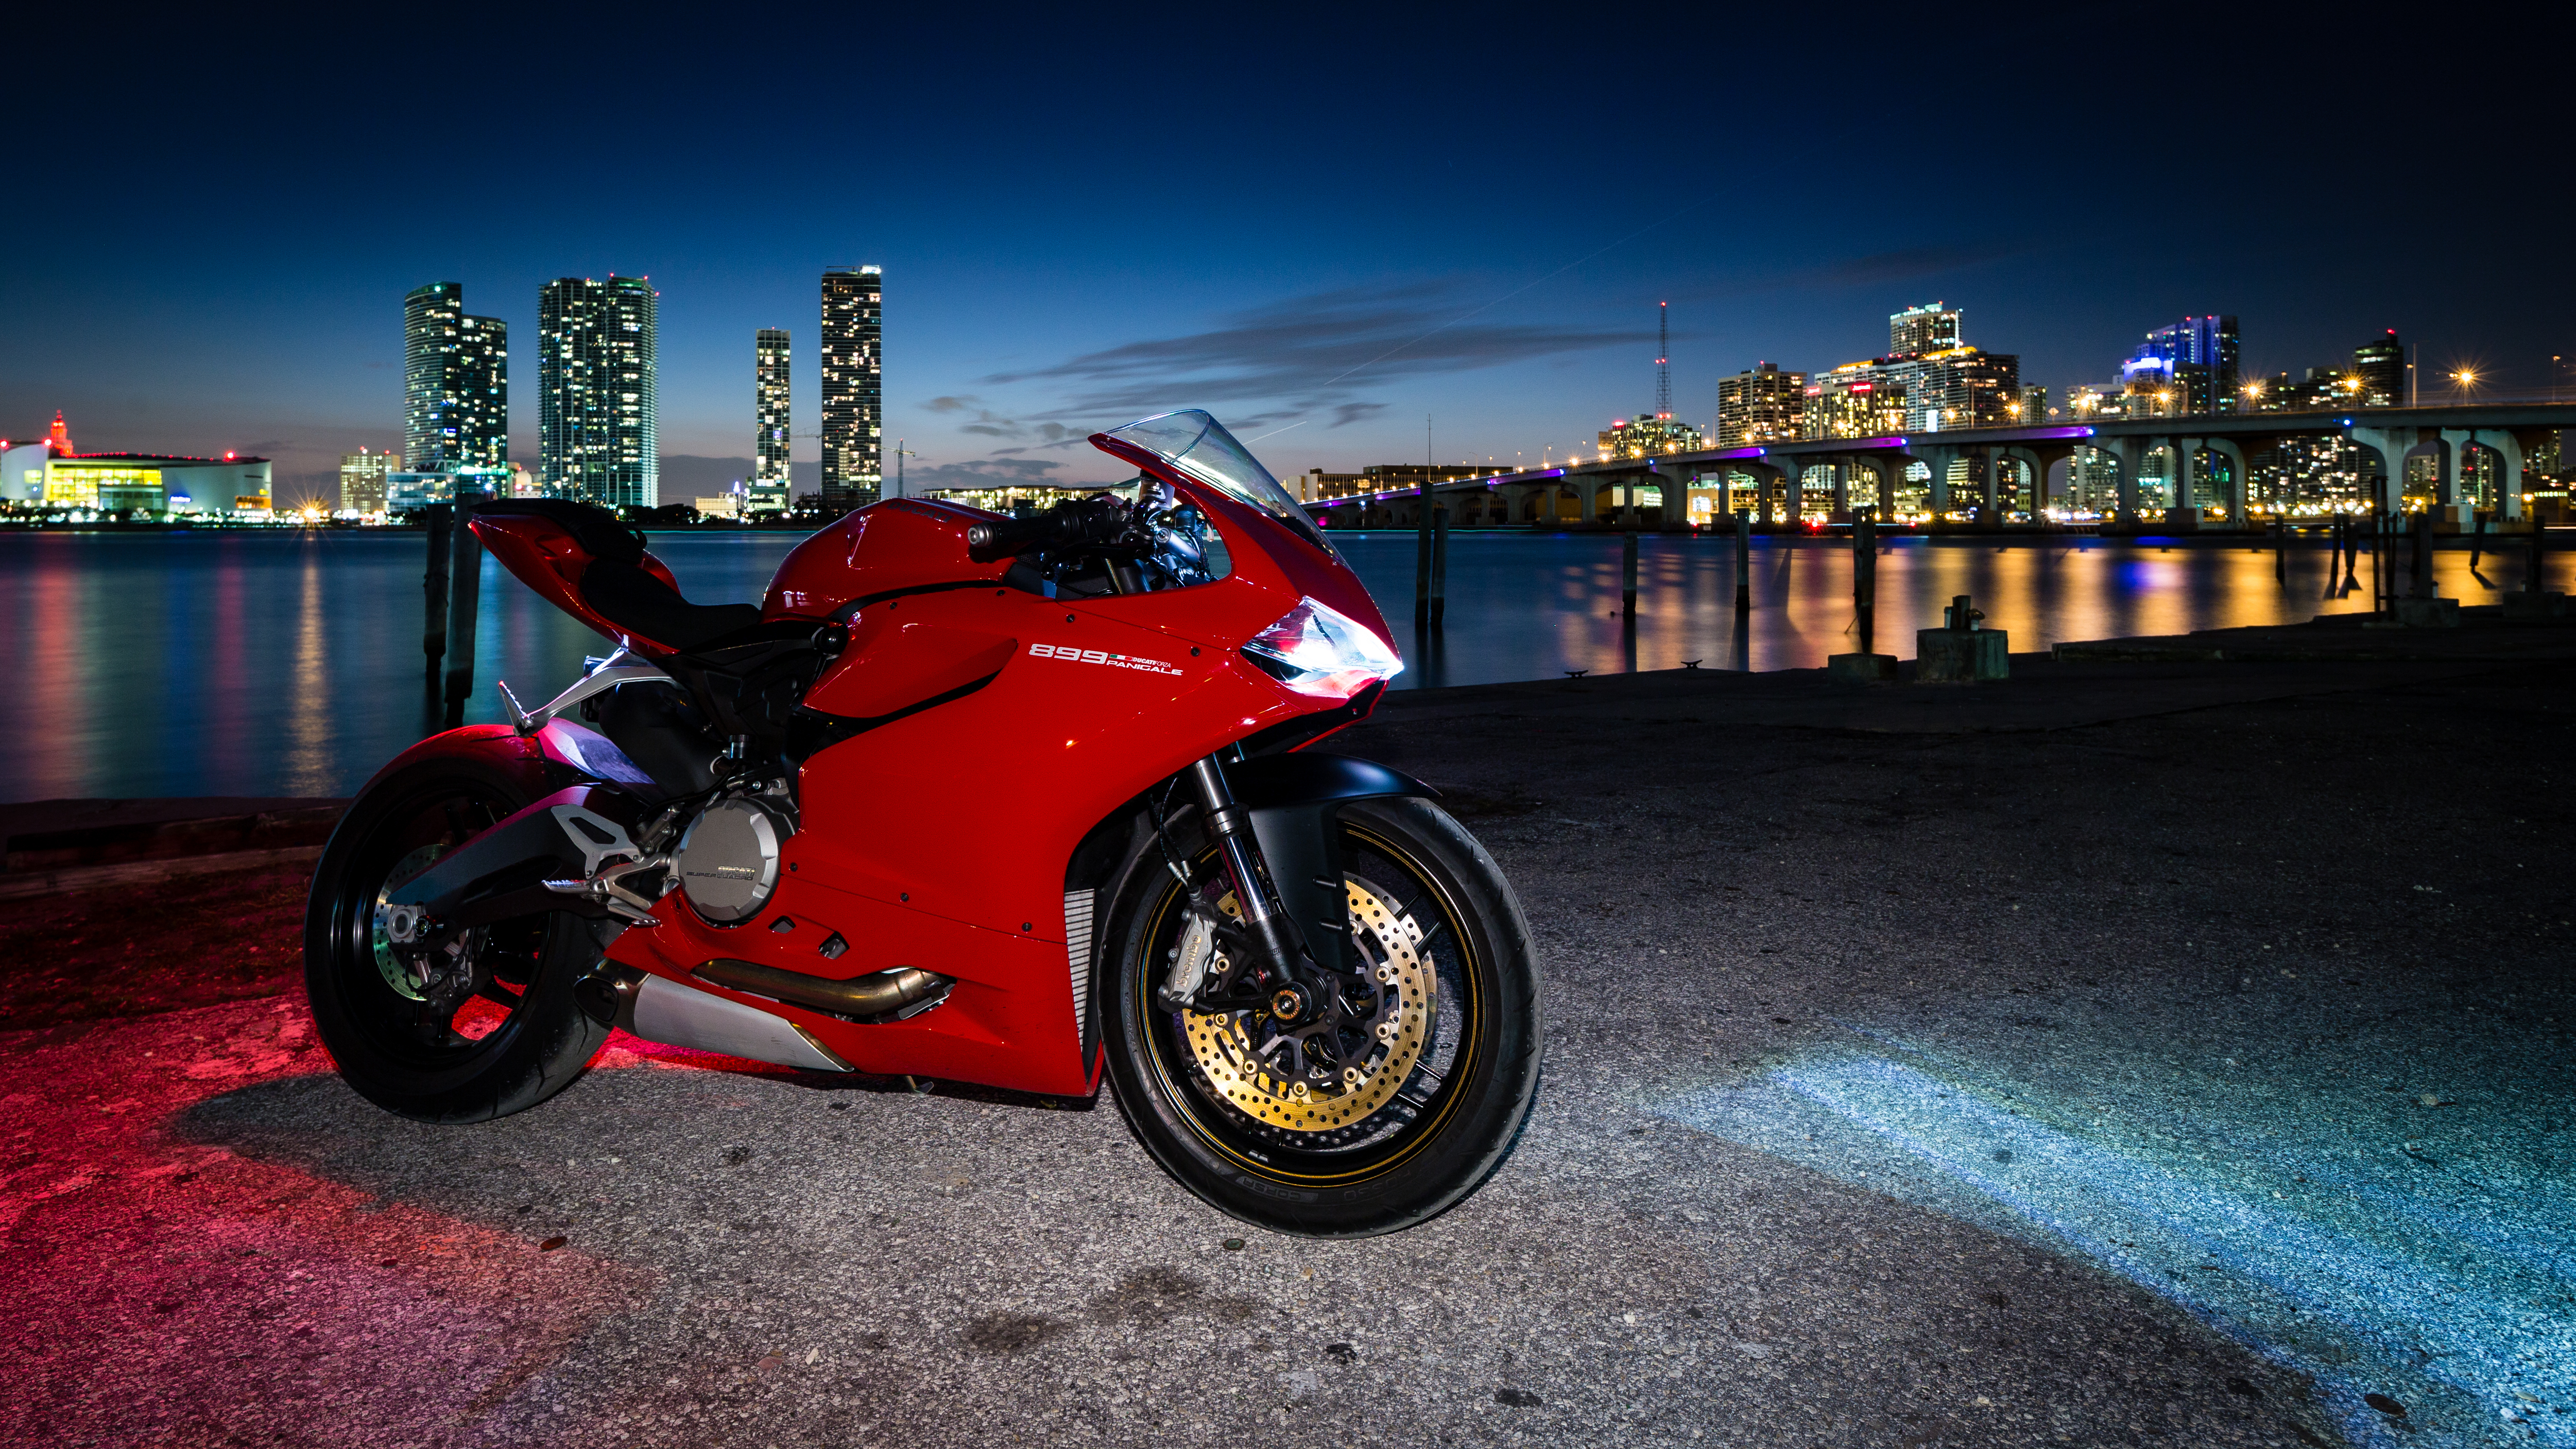 Wallpapers ducati 899 red ducati red dusk city lights 5002x2814